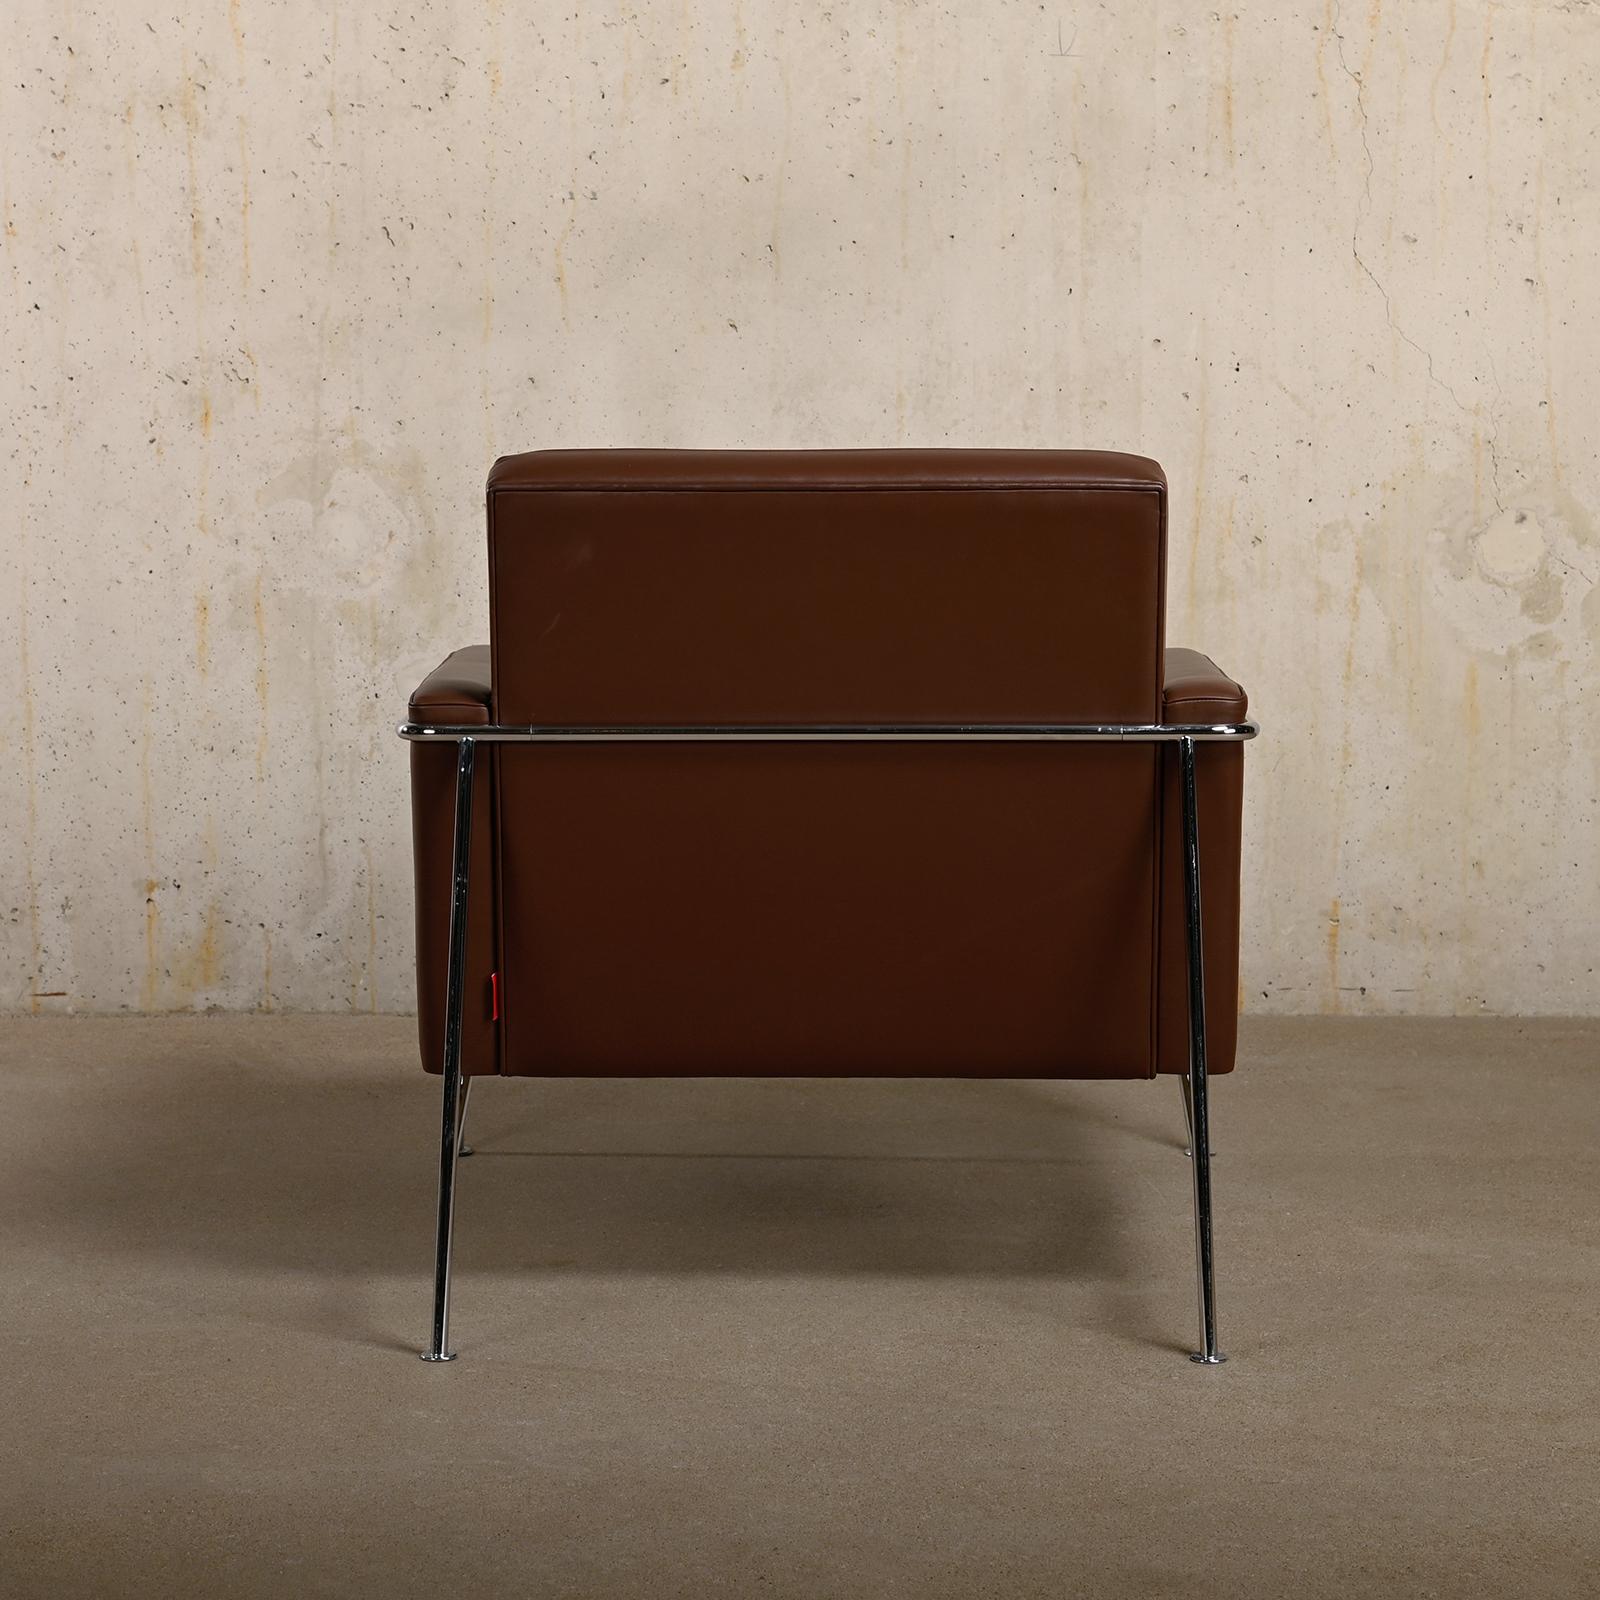 Arne Jacobsen Pair Armchairs 3300 Series in Chestnut leather for Fritz Hansen In Good Condition For Sale In Amsterdam, NL